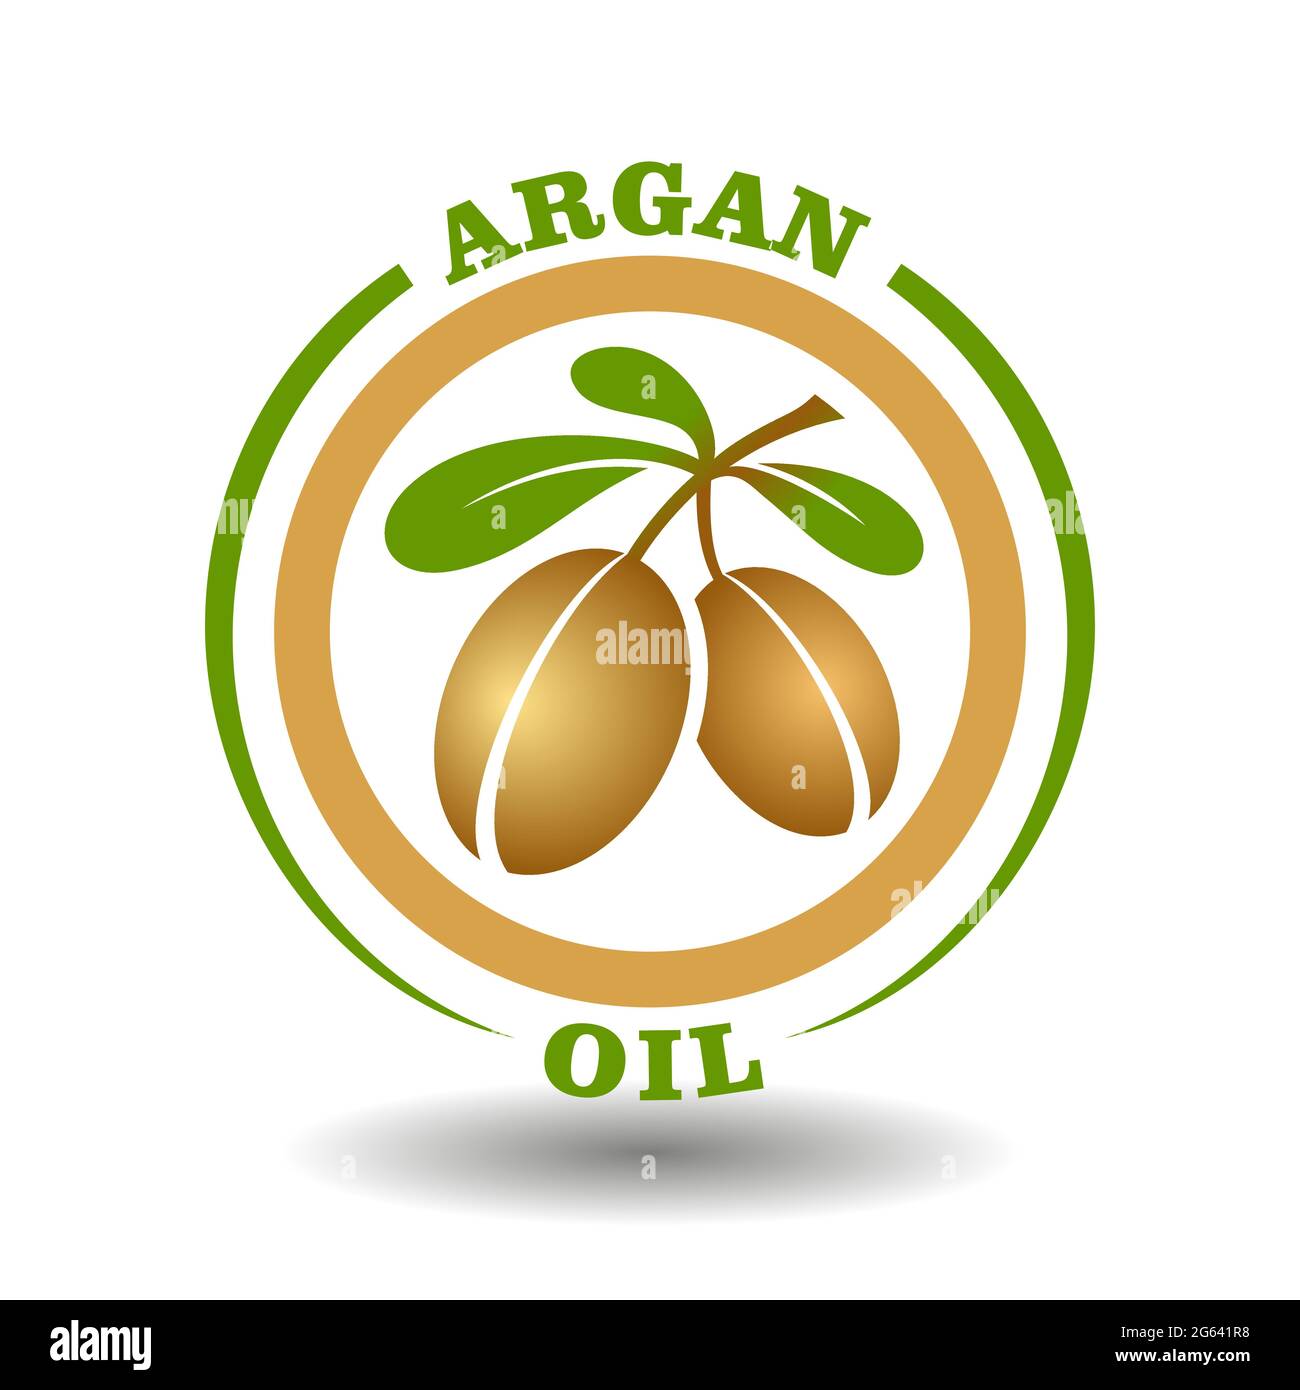 Vector circle logo Argan oil with green leaves icon and argania nuts symbol in round pictogram for organic cosmetics and herbal medicine package label Stock Vector